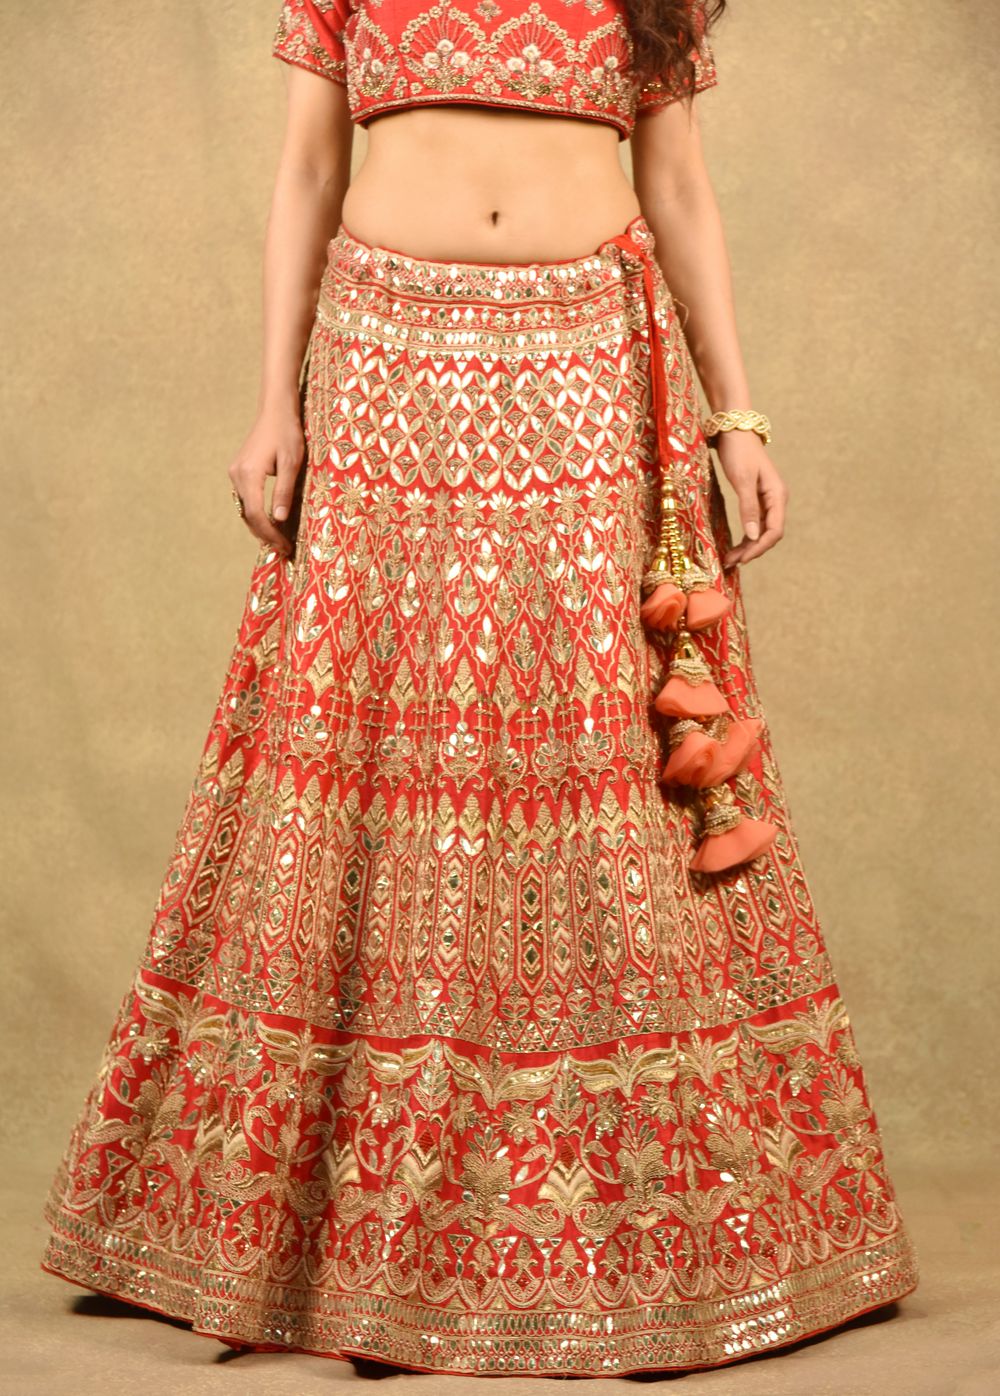 Photo From our new collection - By Kala Shree Regalia